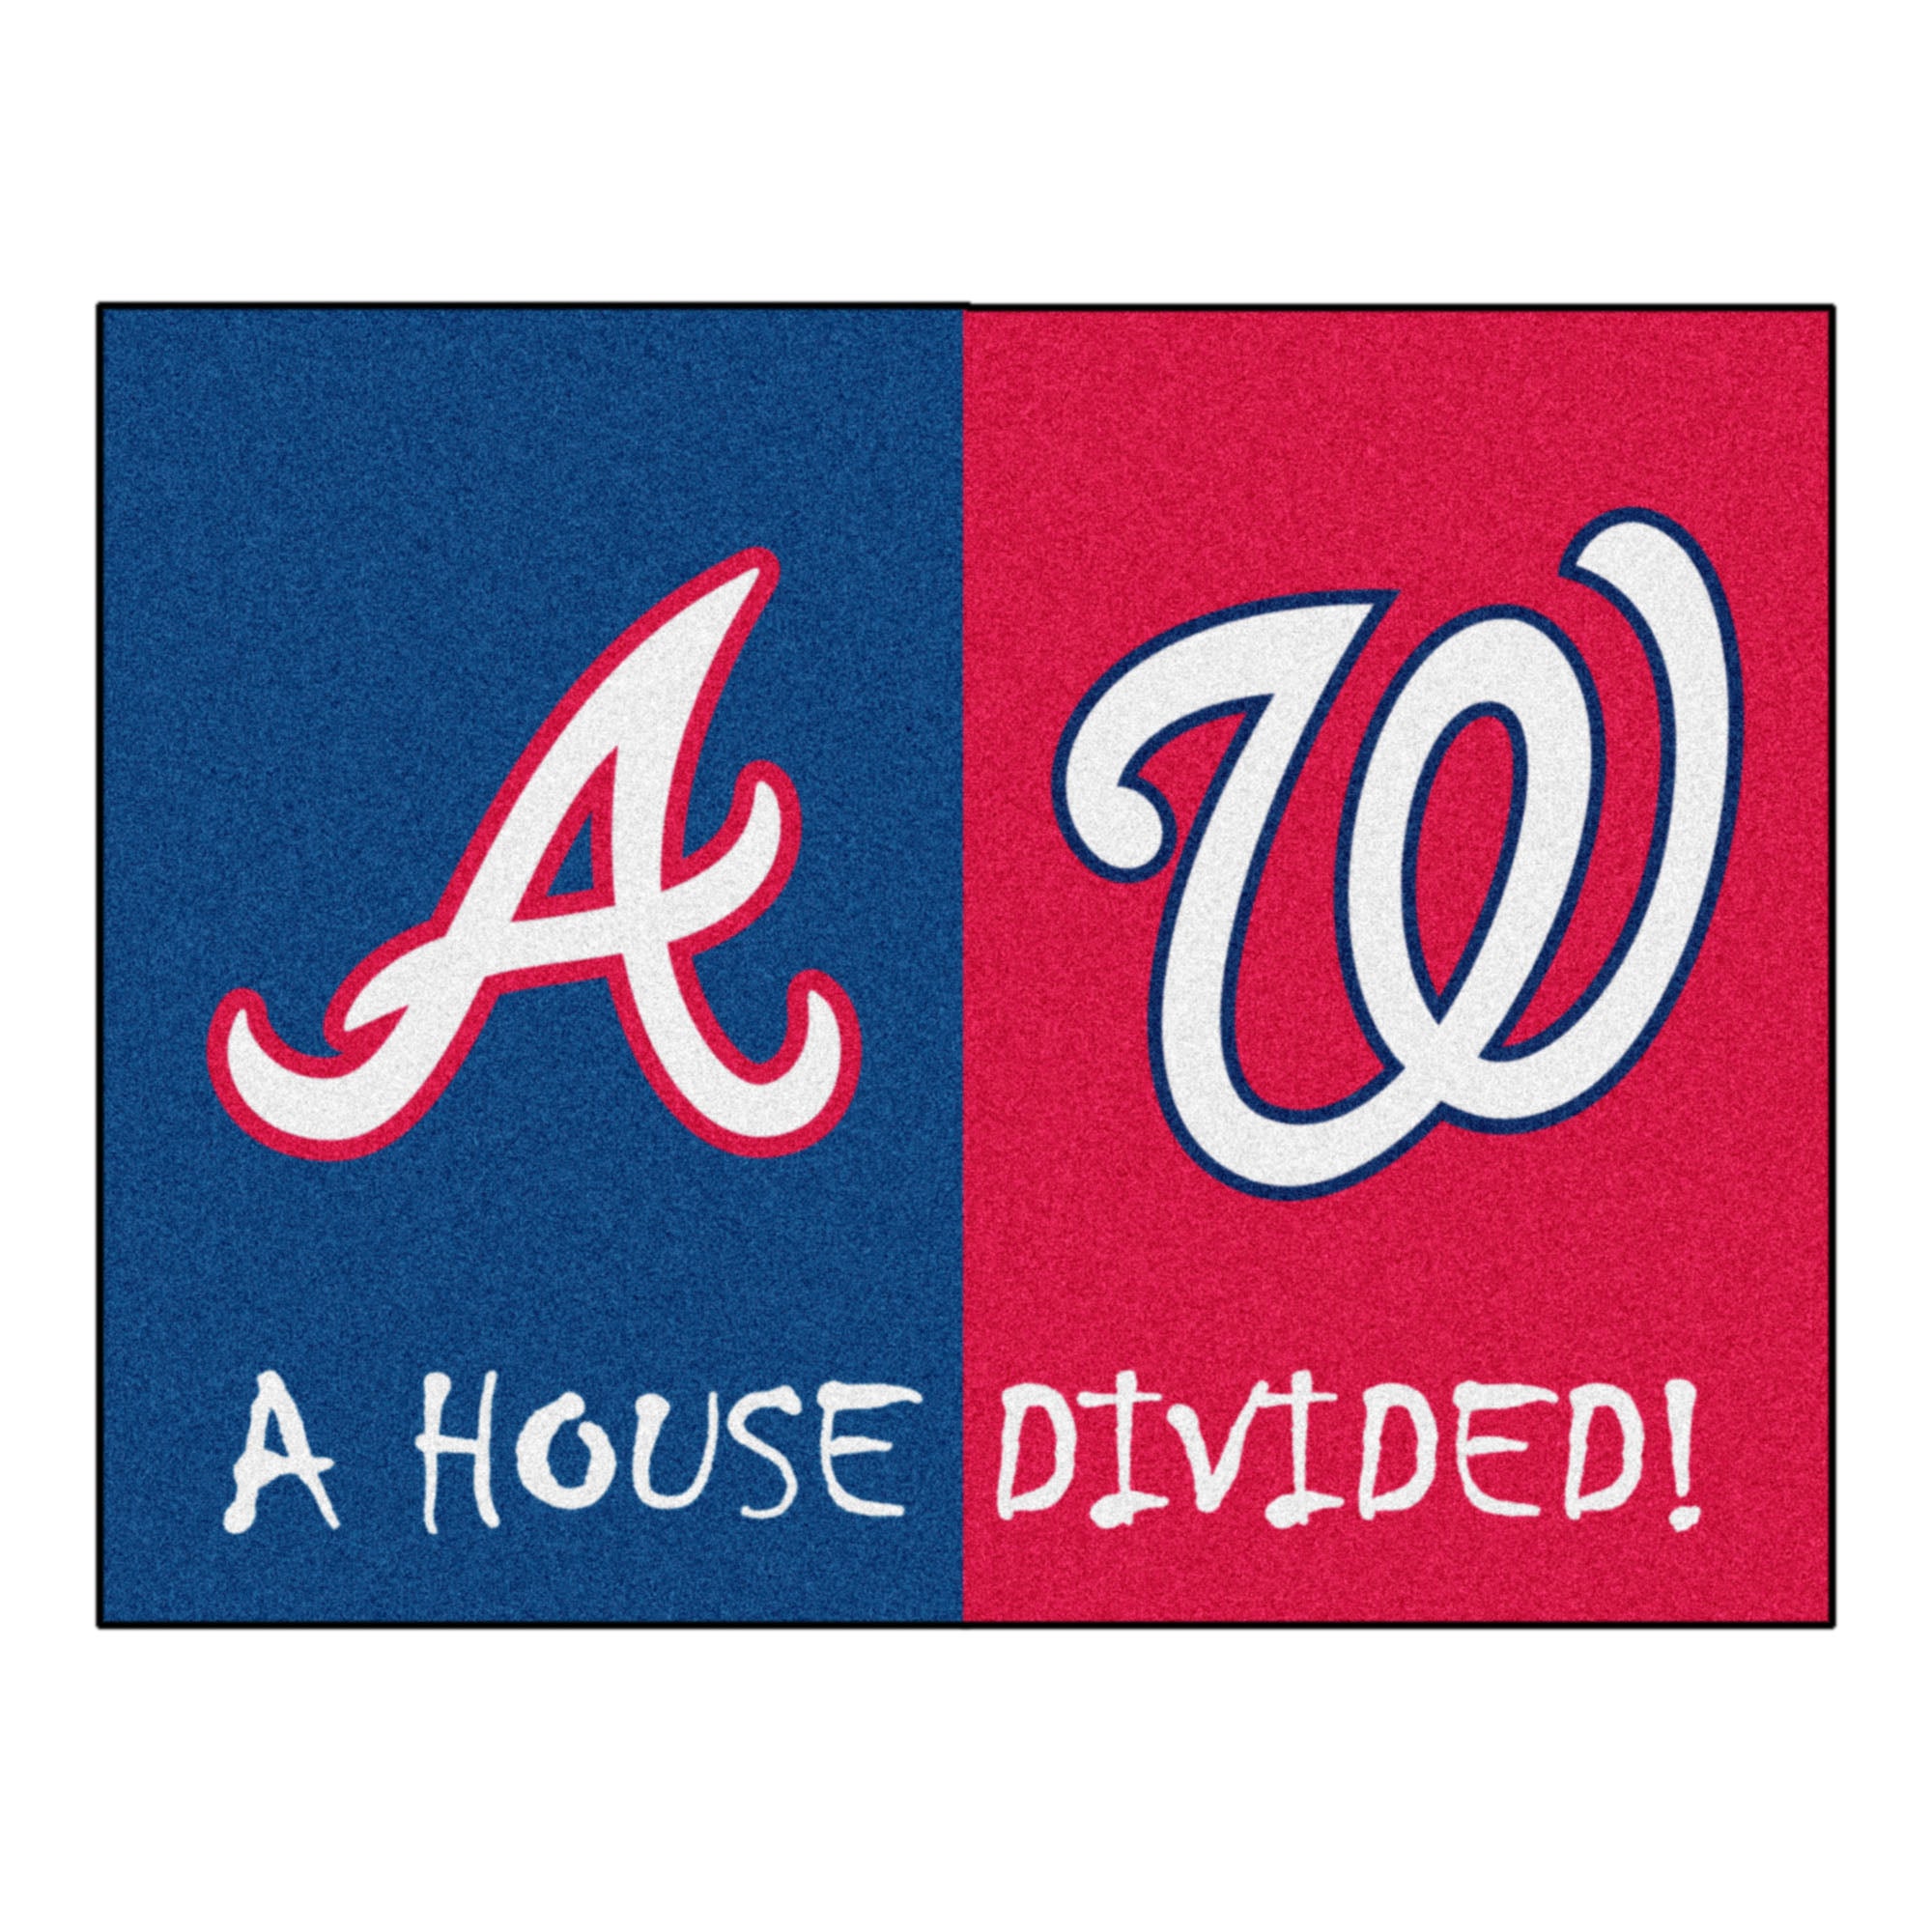 Fanmat - Mlb house divided - braves / nationals house divided mat